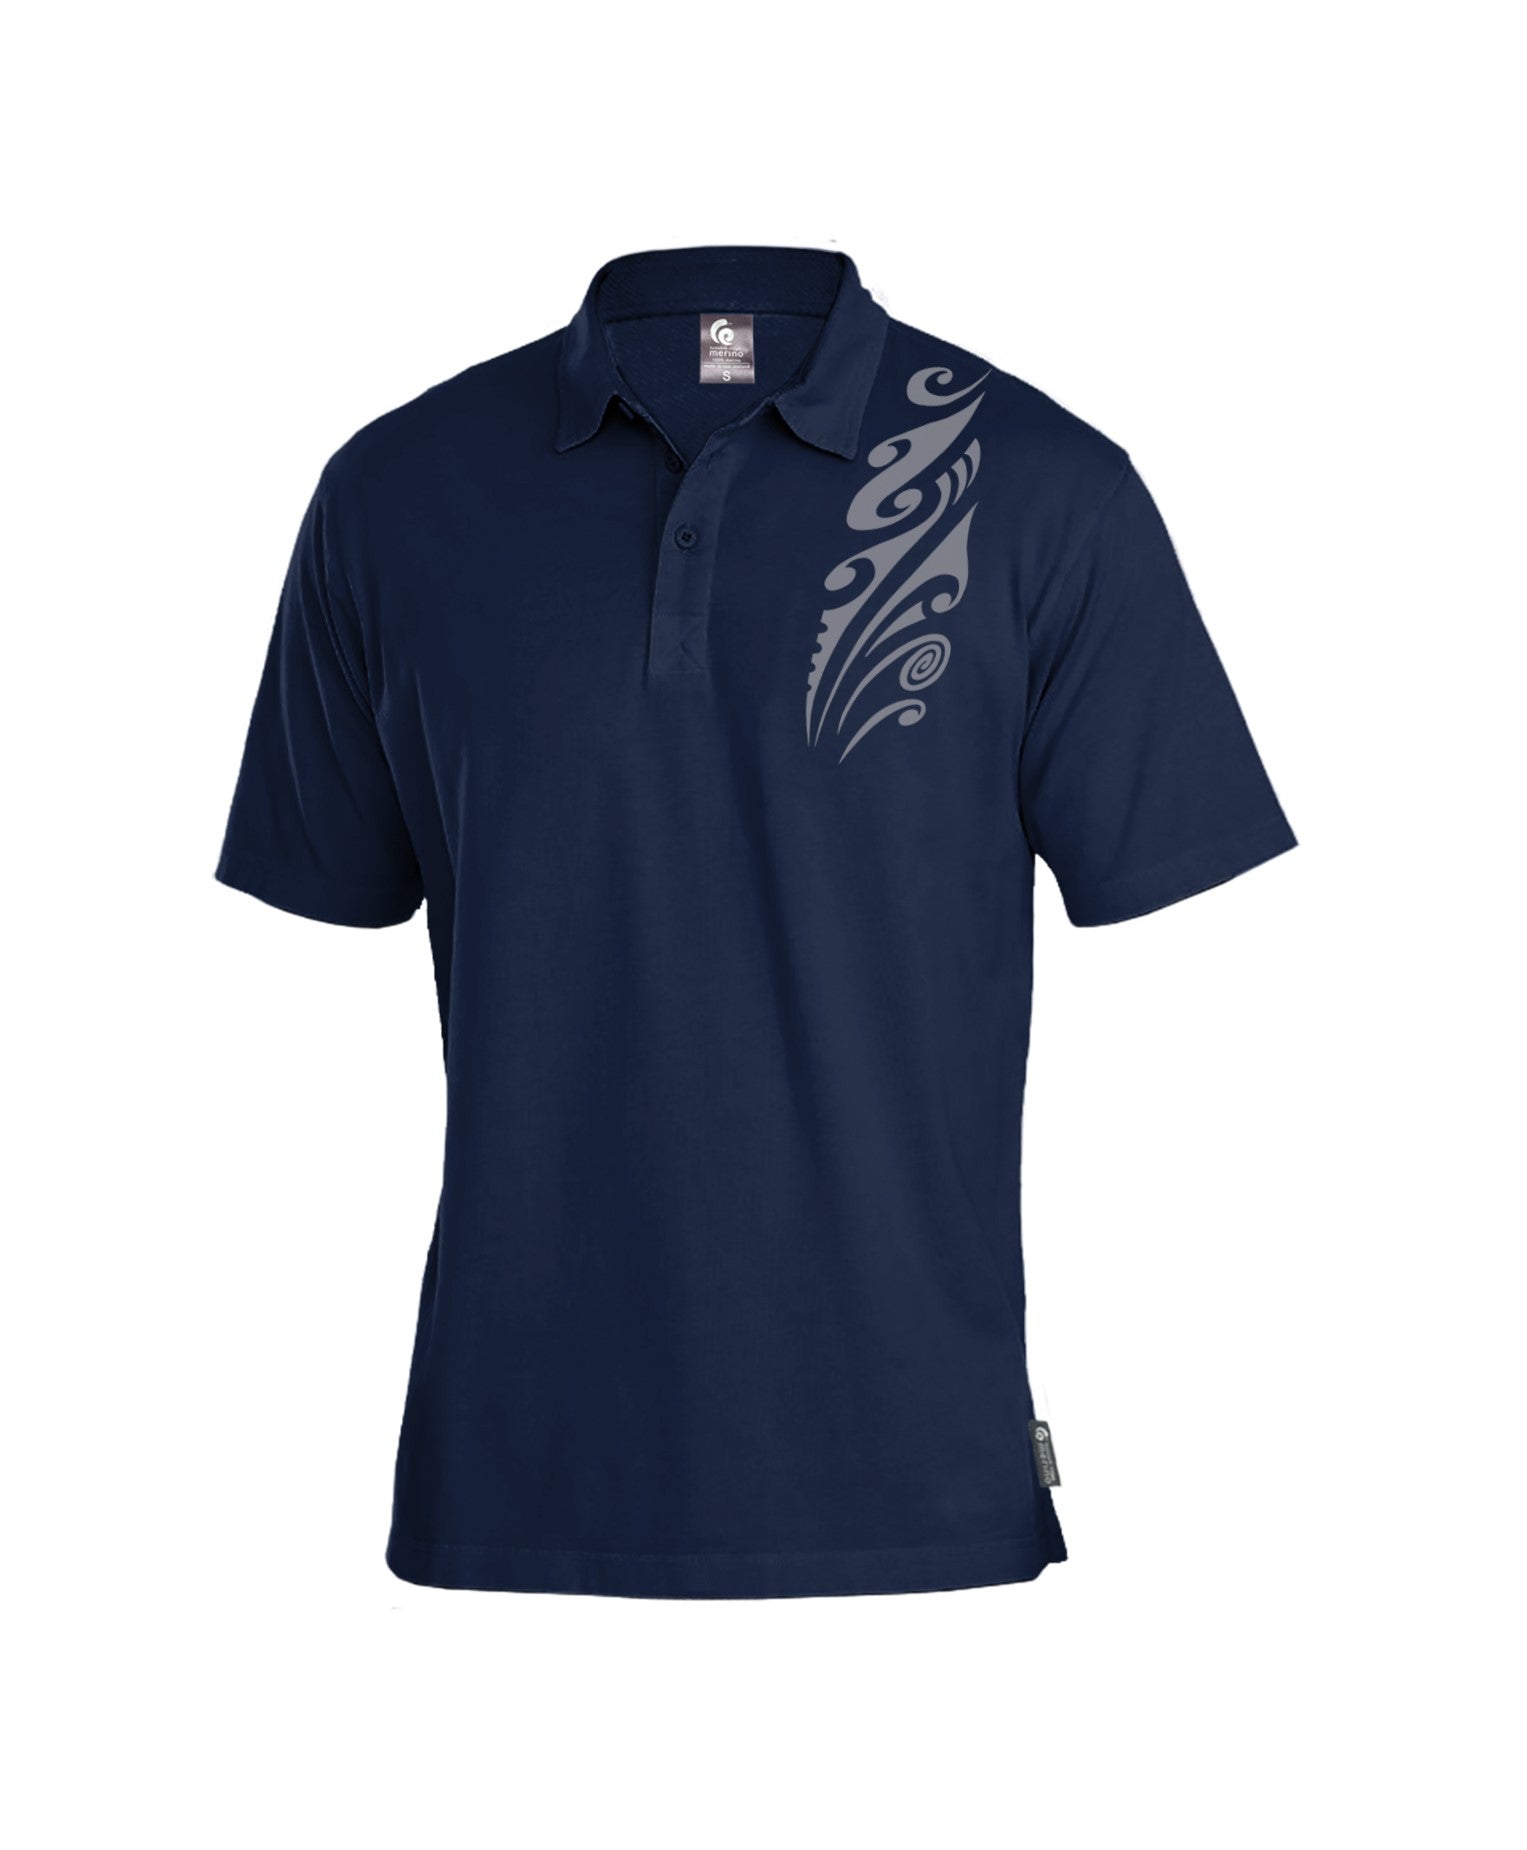 Merino Men's Ink Blue Polo With Print. Made in New Zealand.